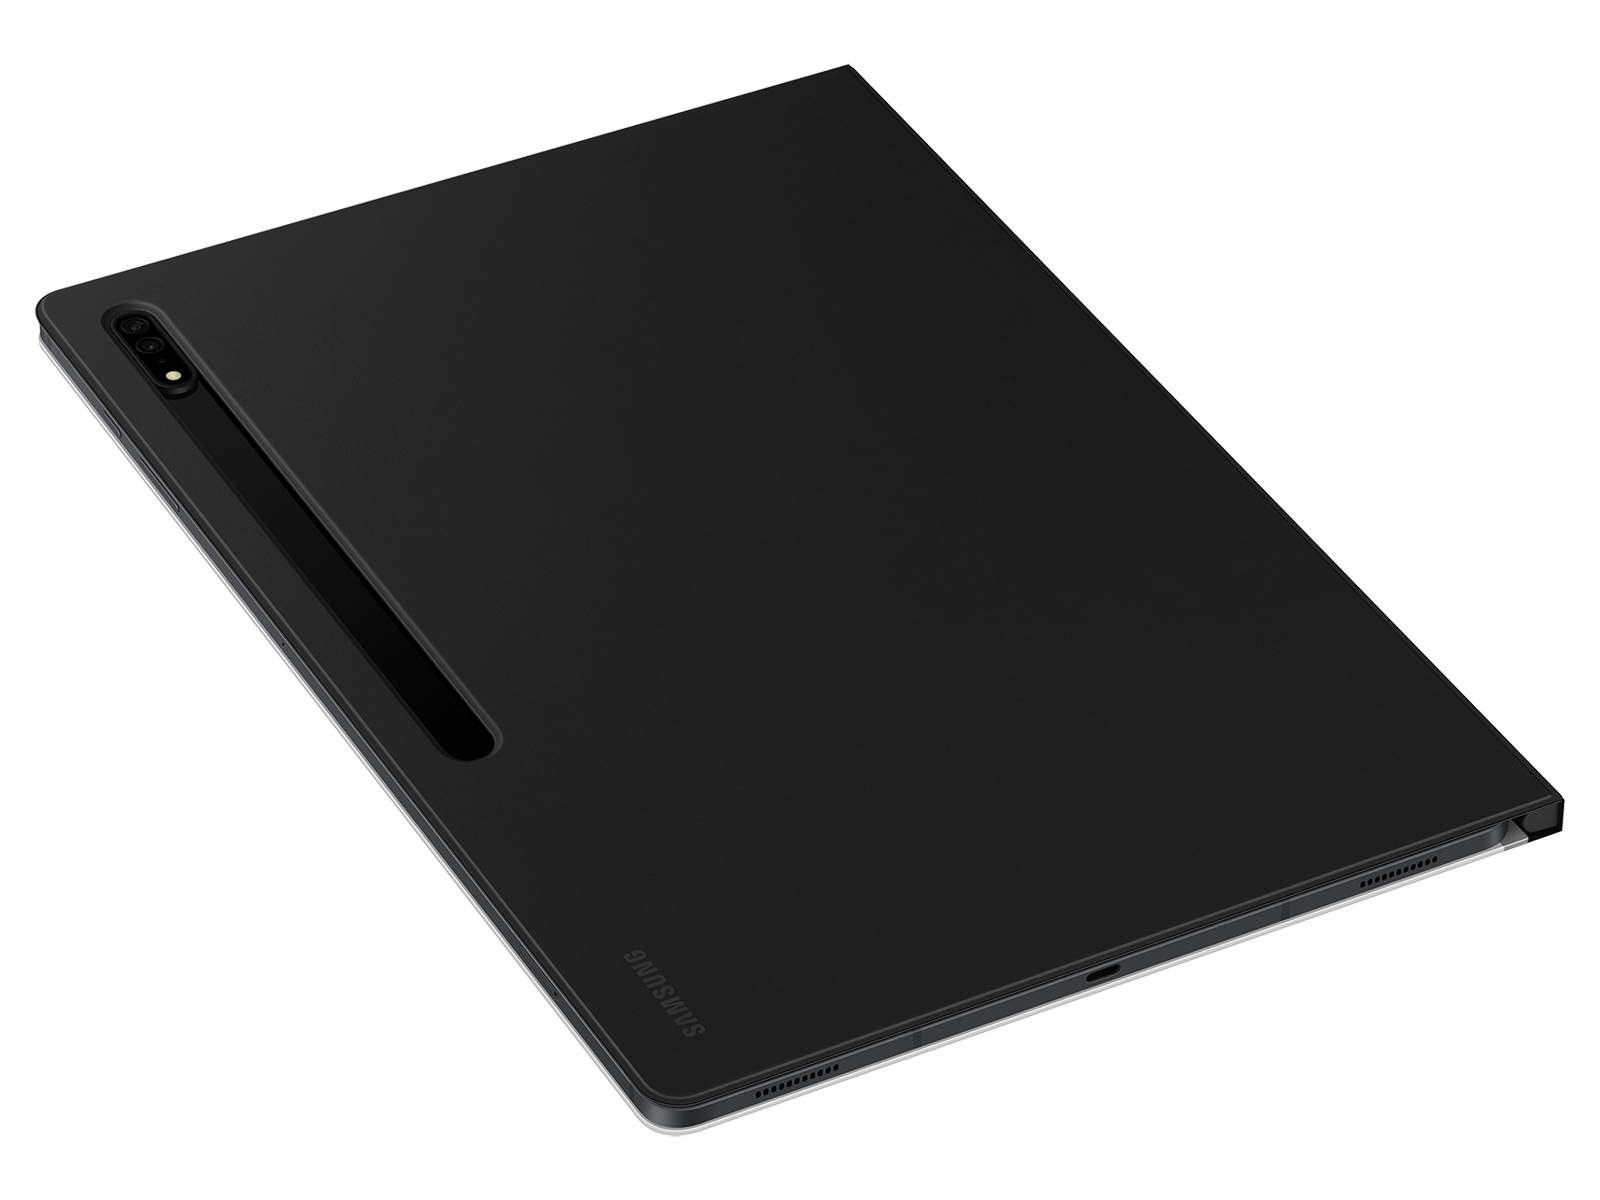 Galaxy Tab S8+ Note View Cover/ブラック [Gal